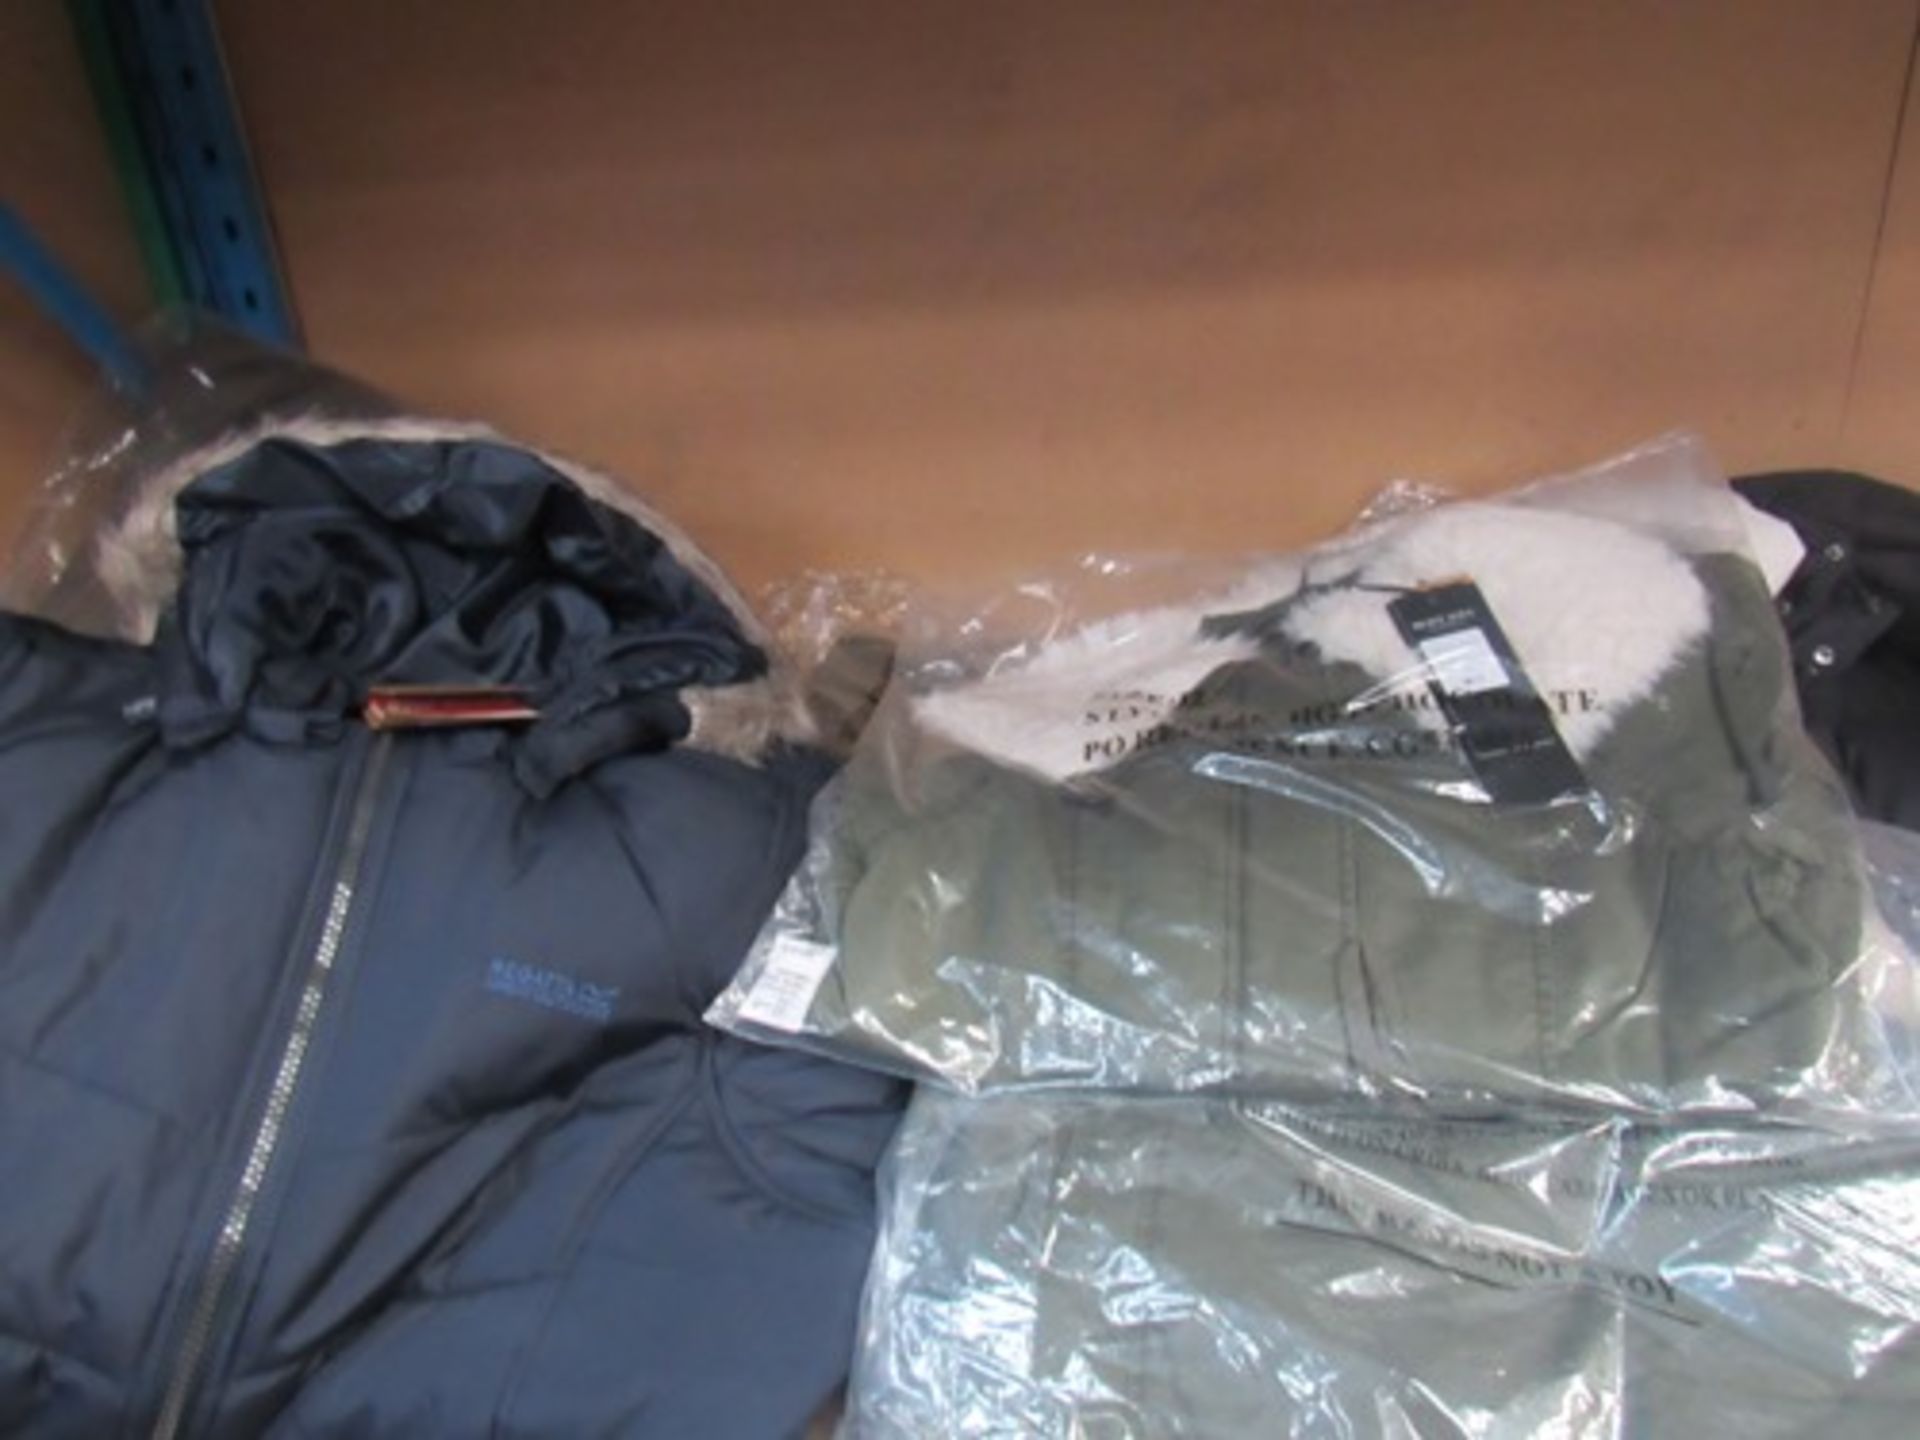 2 x Regatta hooded coats, size 18 and 7 x Brave Soul coats, sizes, 12, 14 and large - New in pack